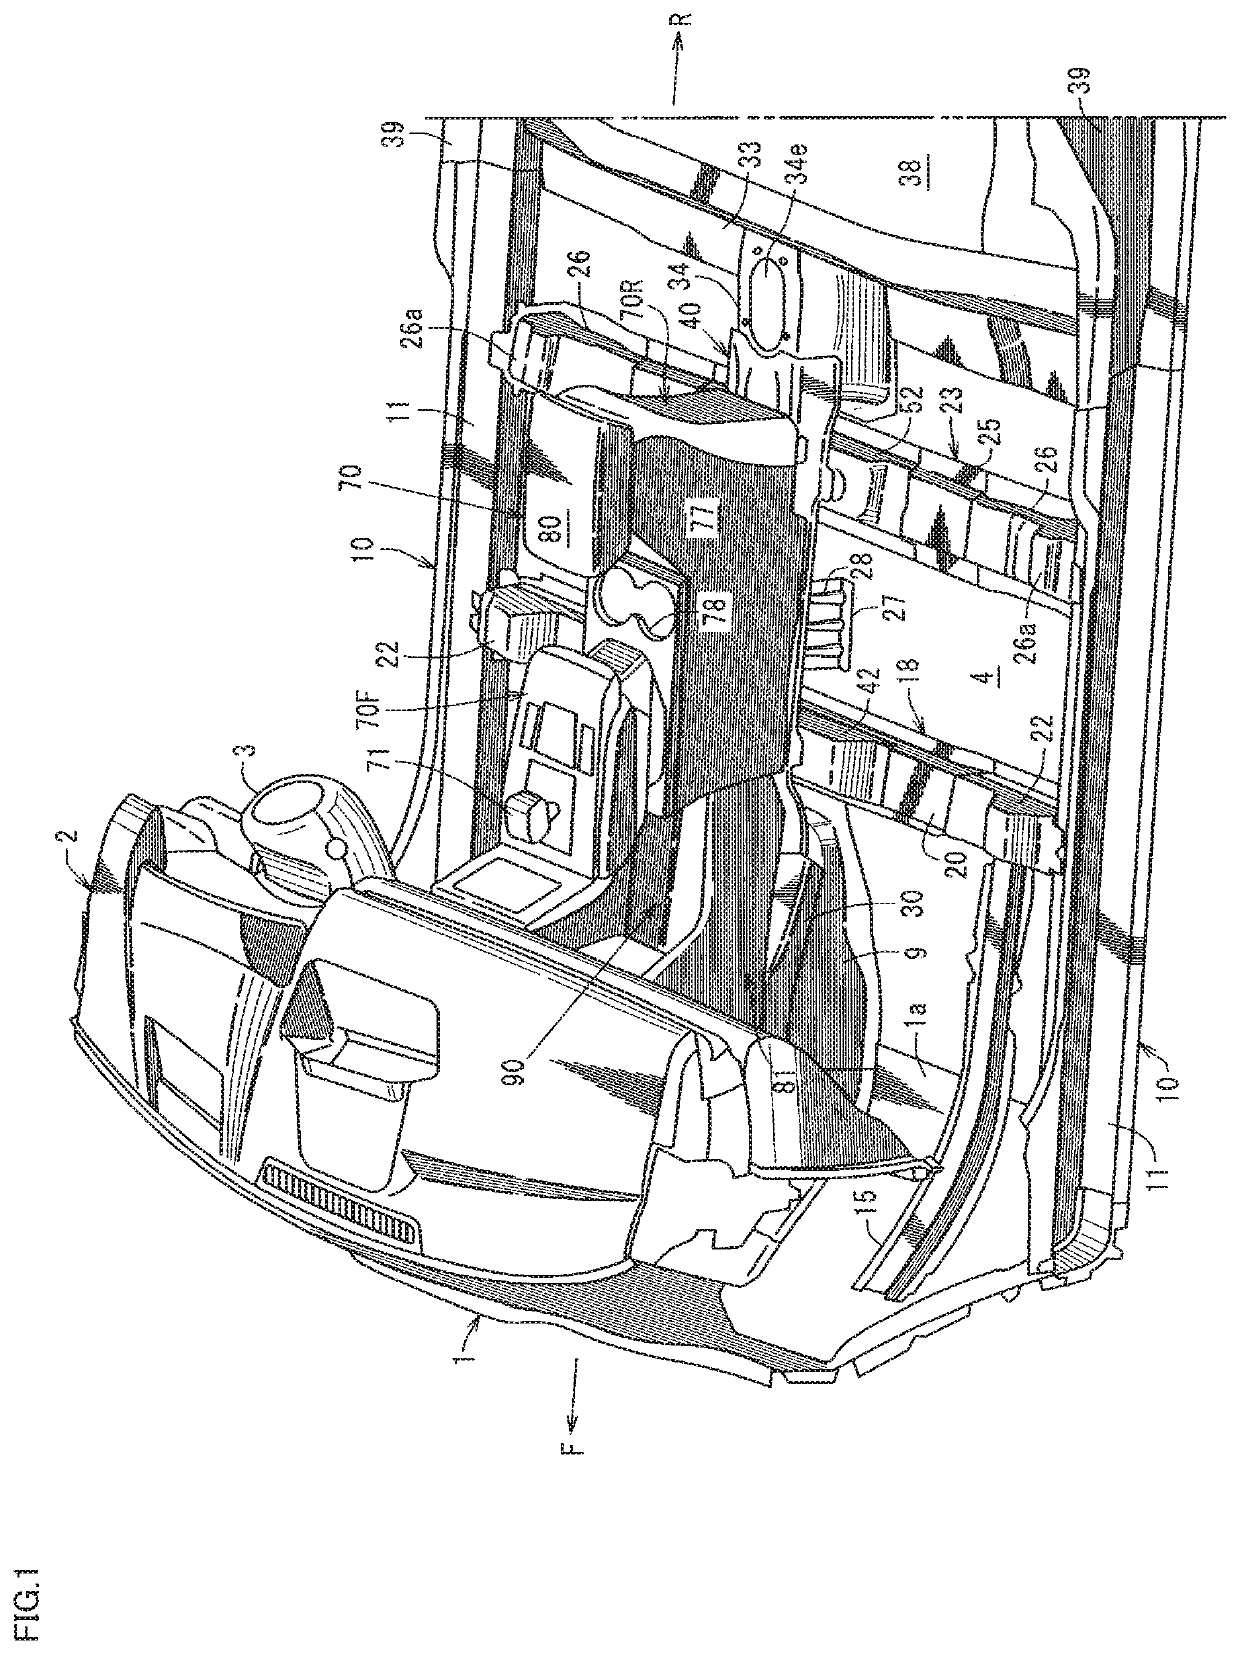 Lower body structure of vehicle